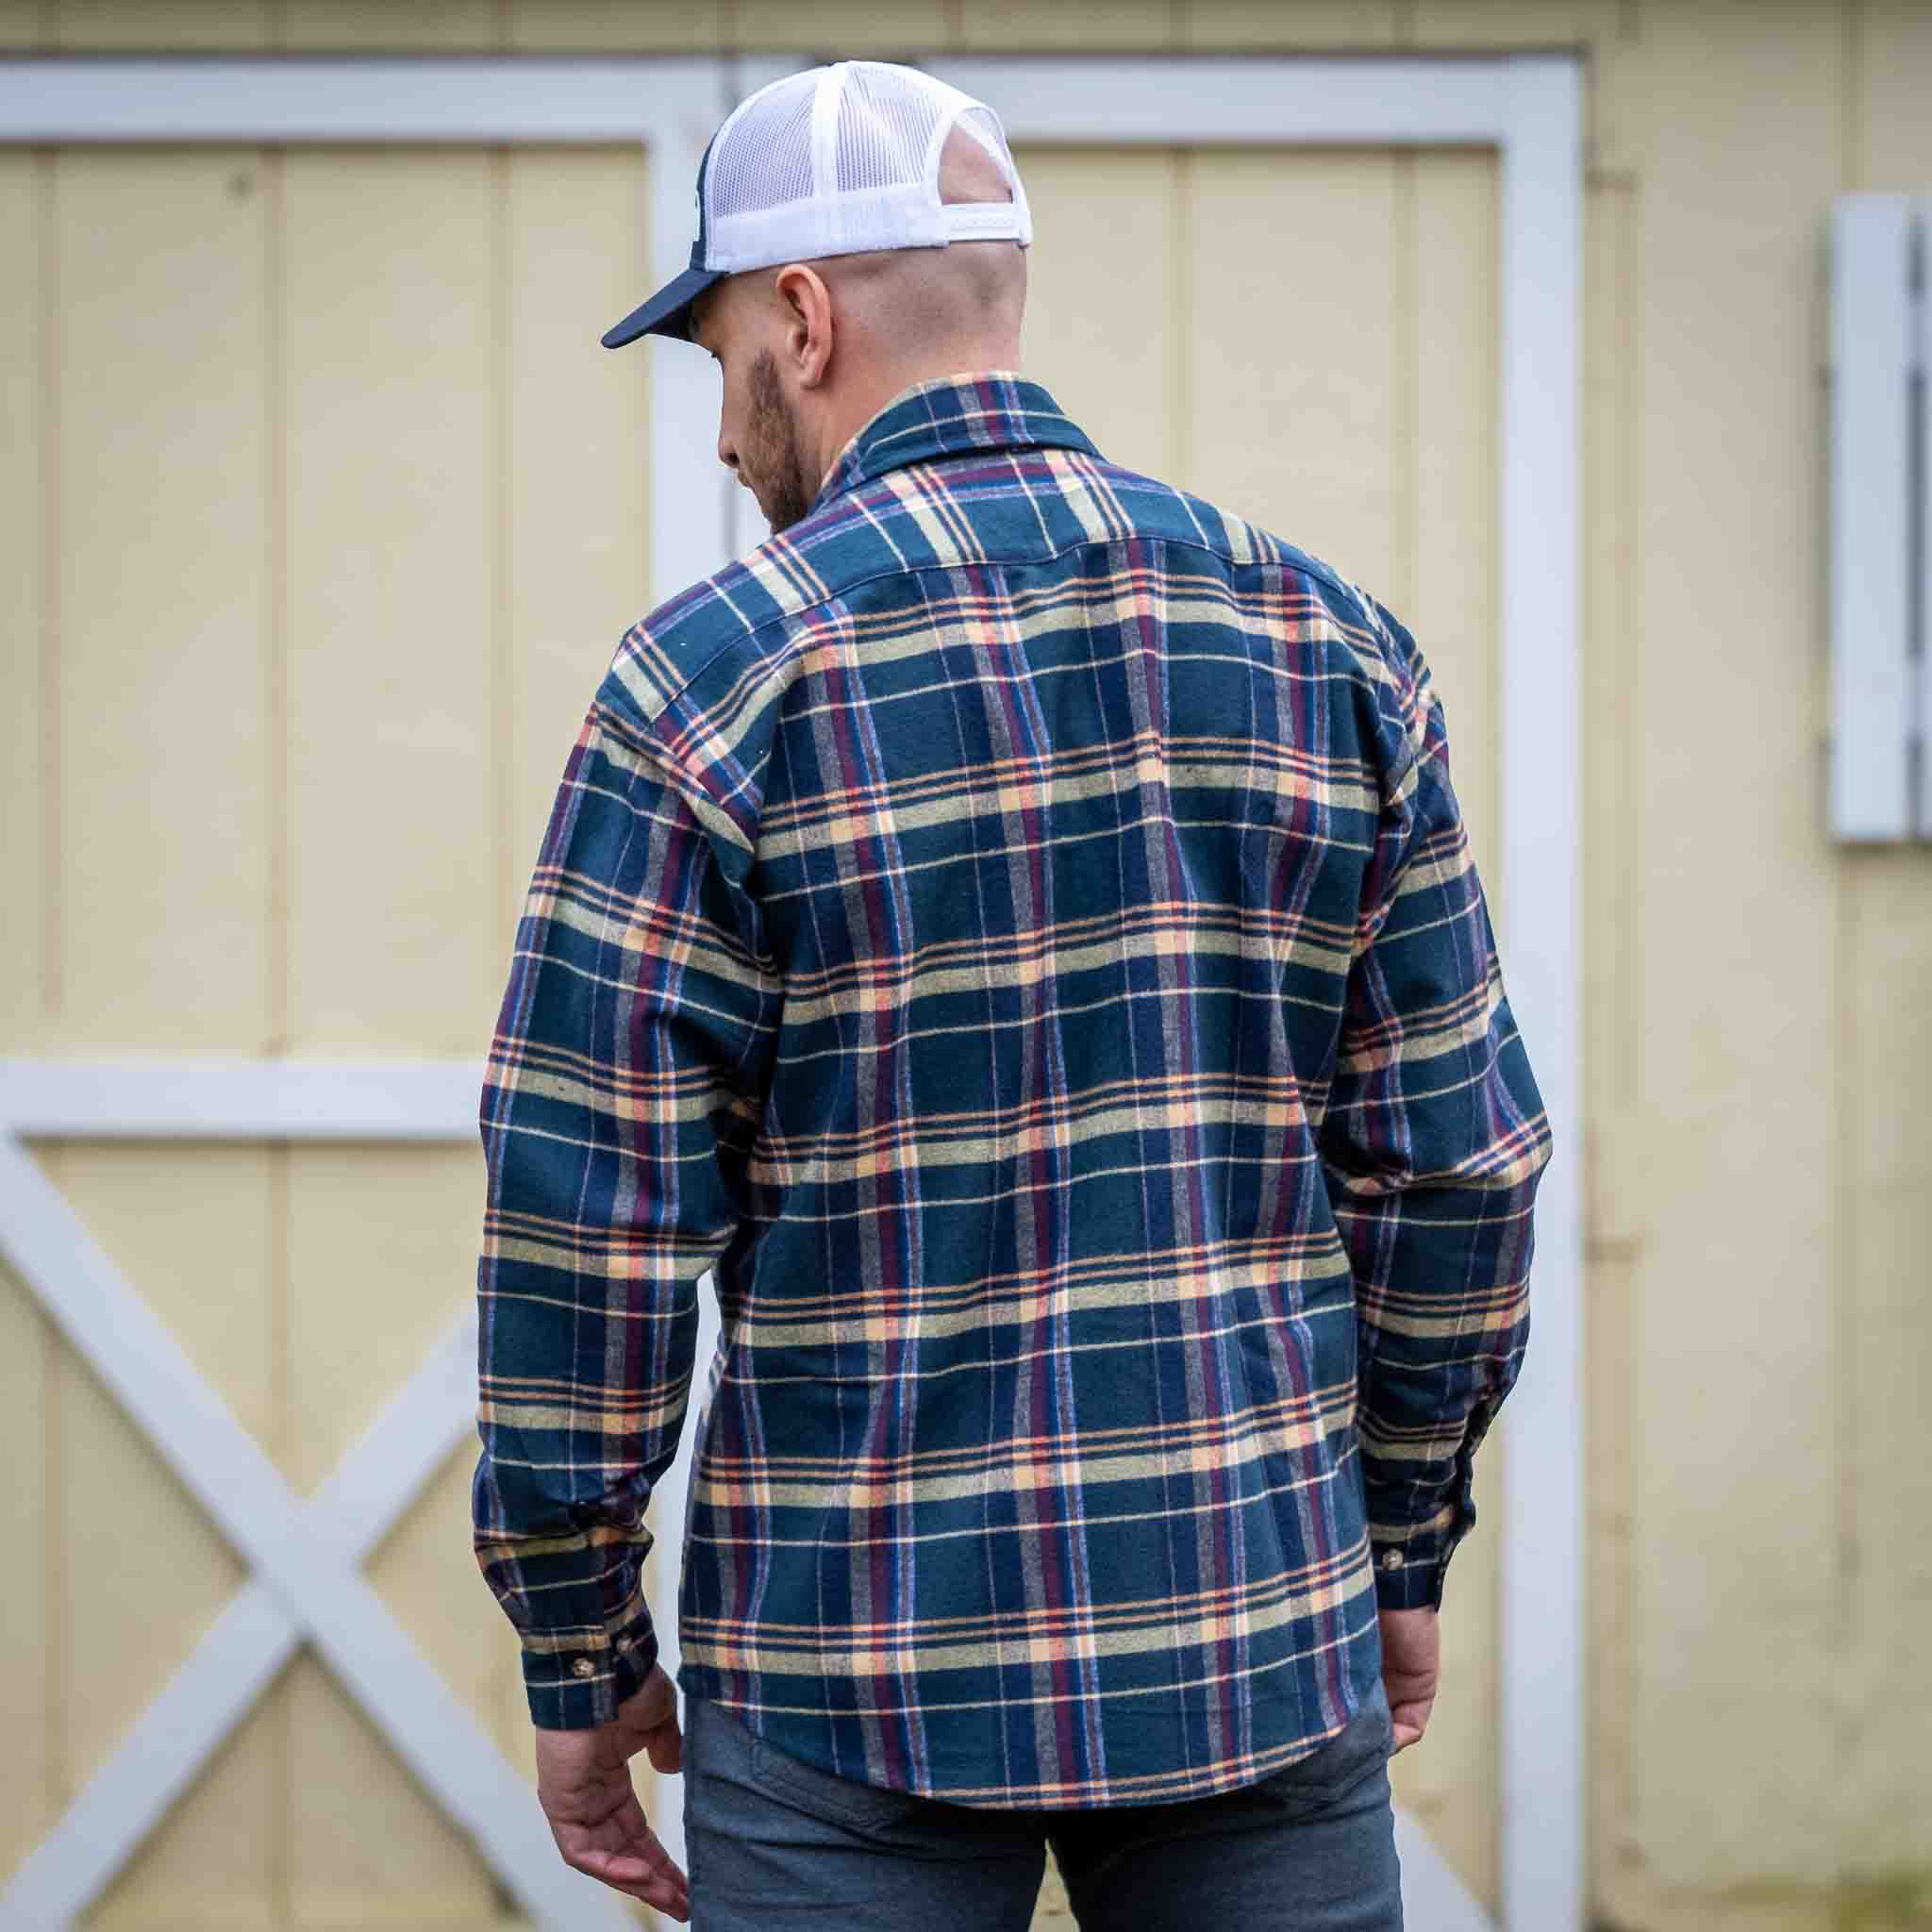 JWM Mens Flannel LS Button Down Navy-Spruce-Tan Compare at $198  ( Allow 1-2 weeks for delivery )